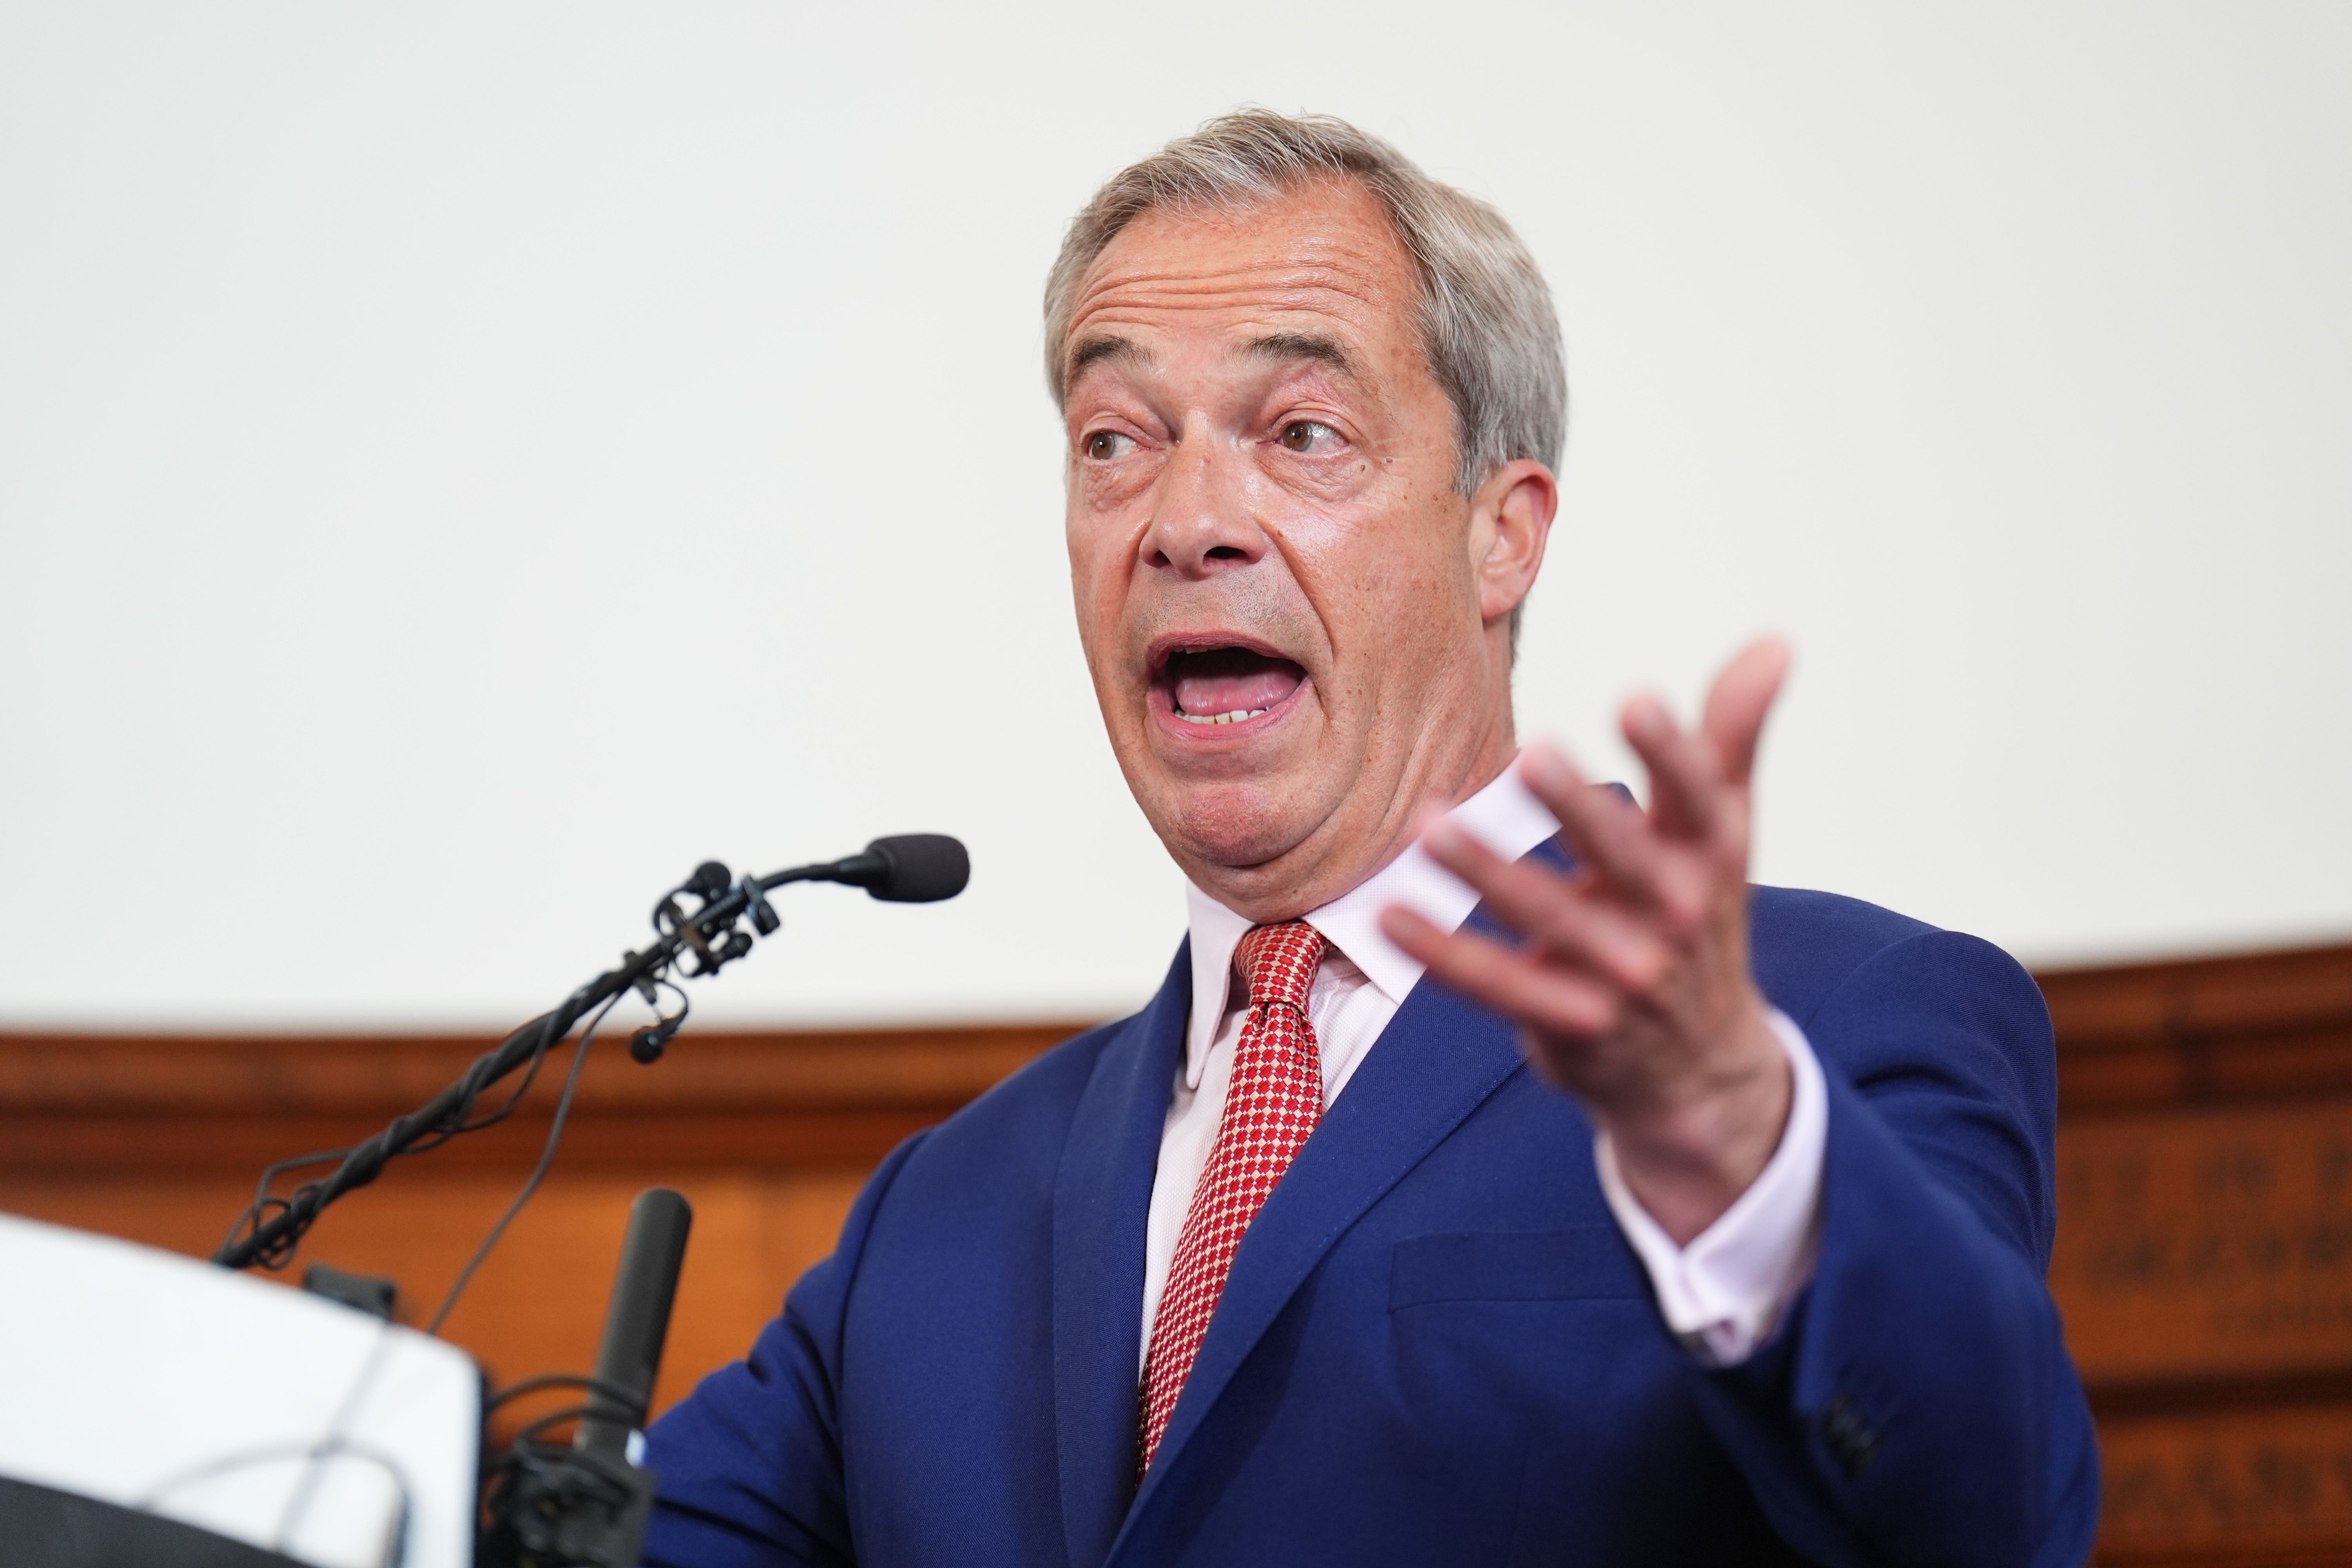 Leader Nigel Farage will outline the party's policy at an event in Merthyr Tydfil, South Wales (James Manning/PA)